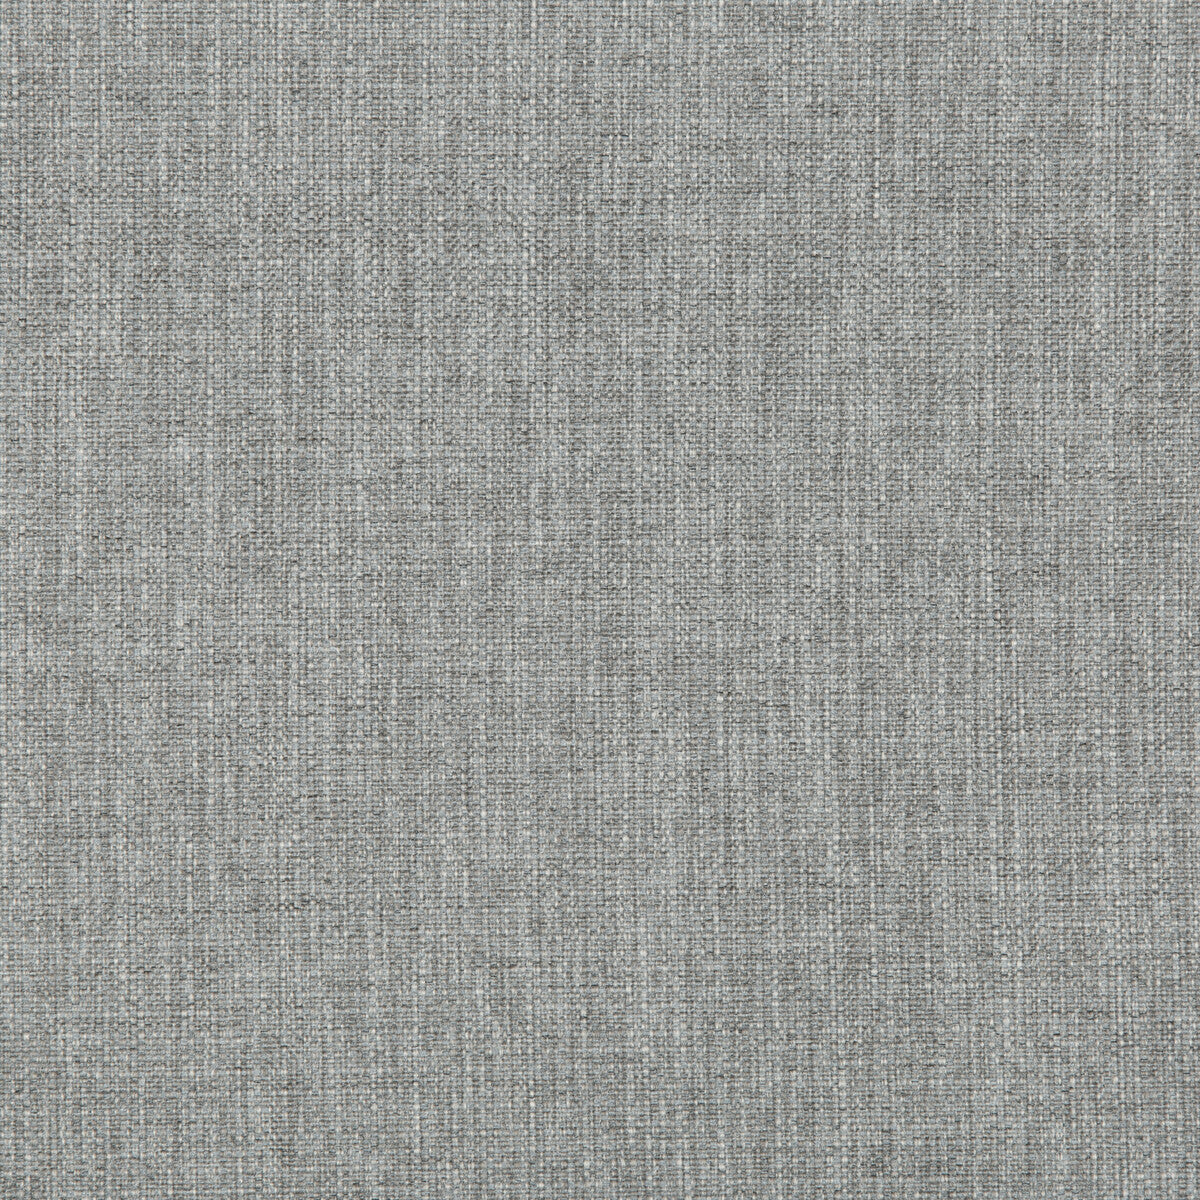 Kravet Contract fabric in 35443-1511 color - pattern 35443.1511.0 - by Kravet Contract